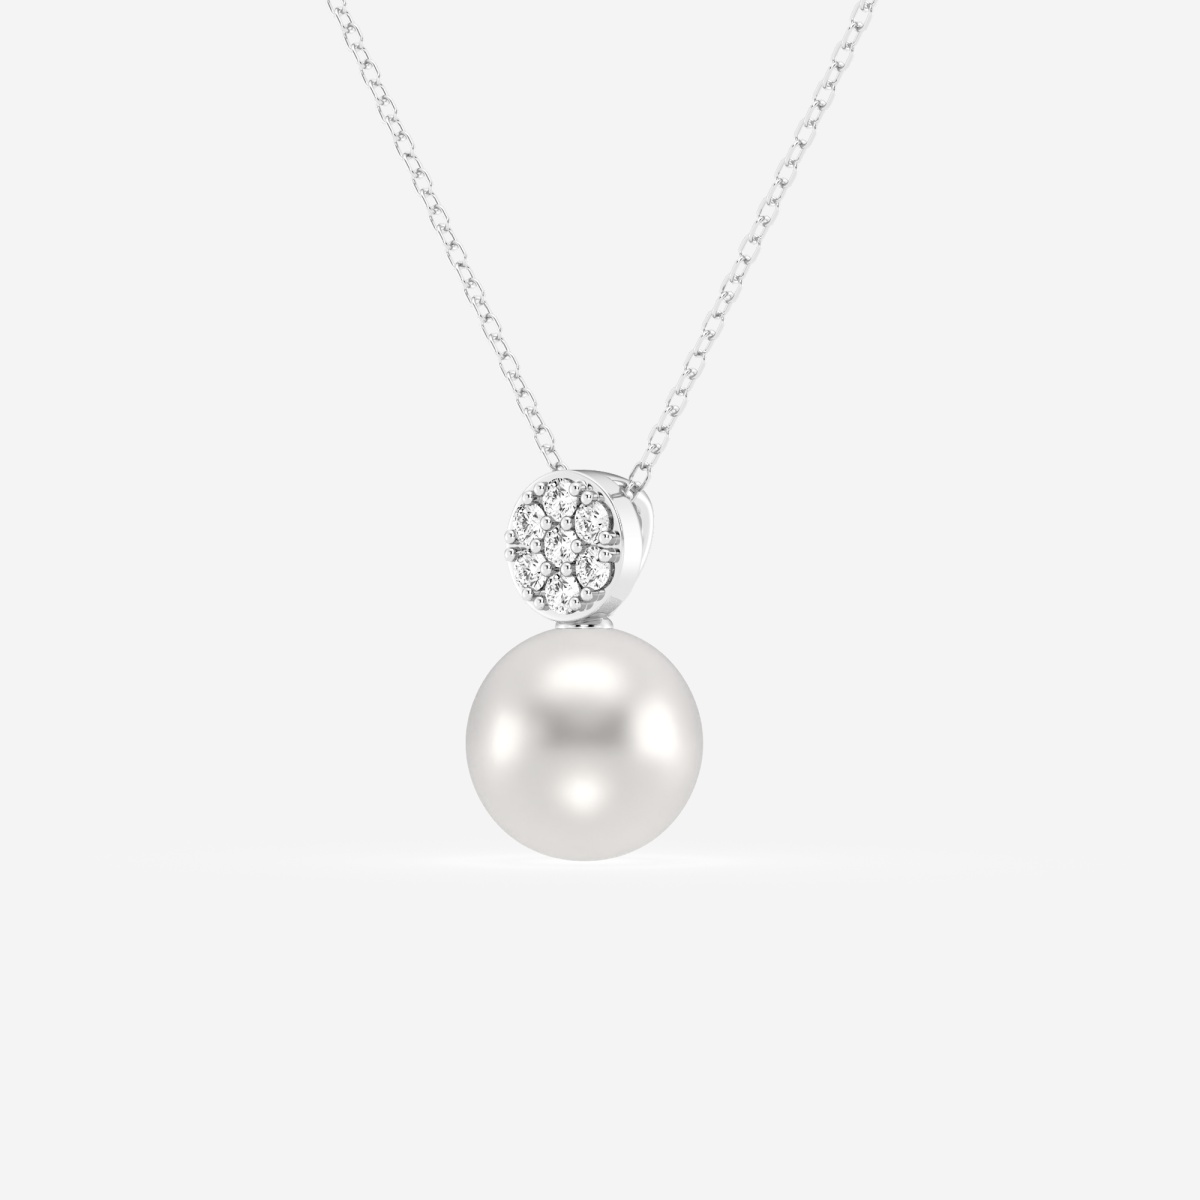 Additional Image 1 for  7.5 - 8.0 mm Cultured Freshwater Pearl and 1/10 ctw Lab Grown Diamond Fashion Pendant